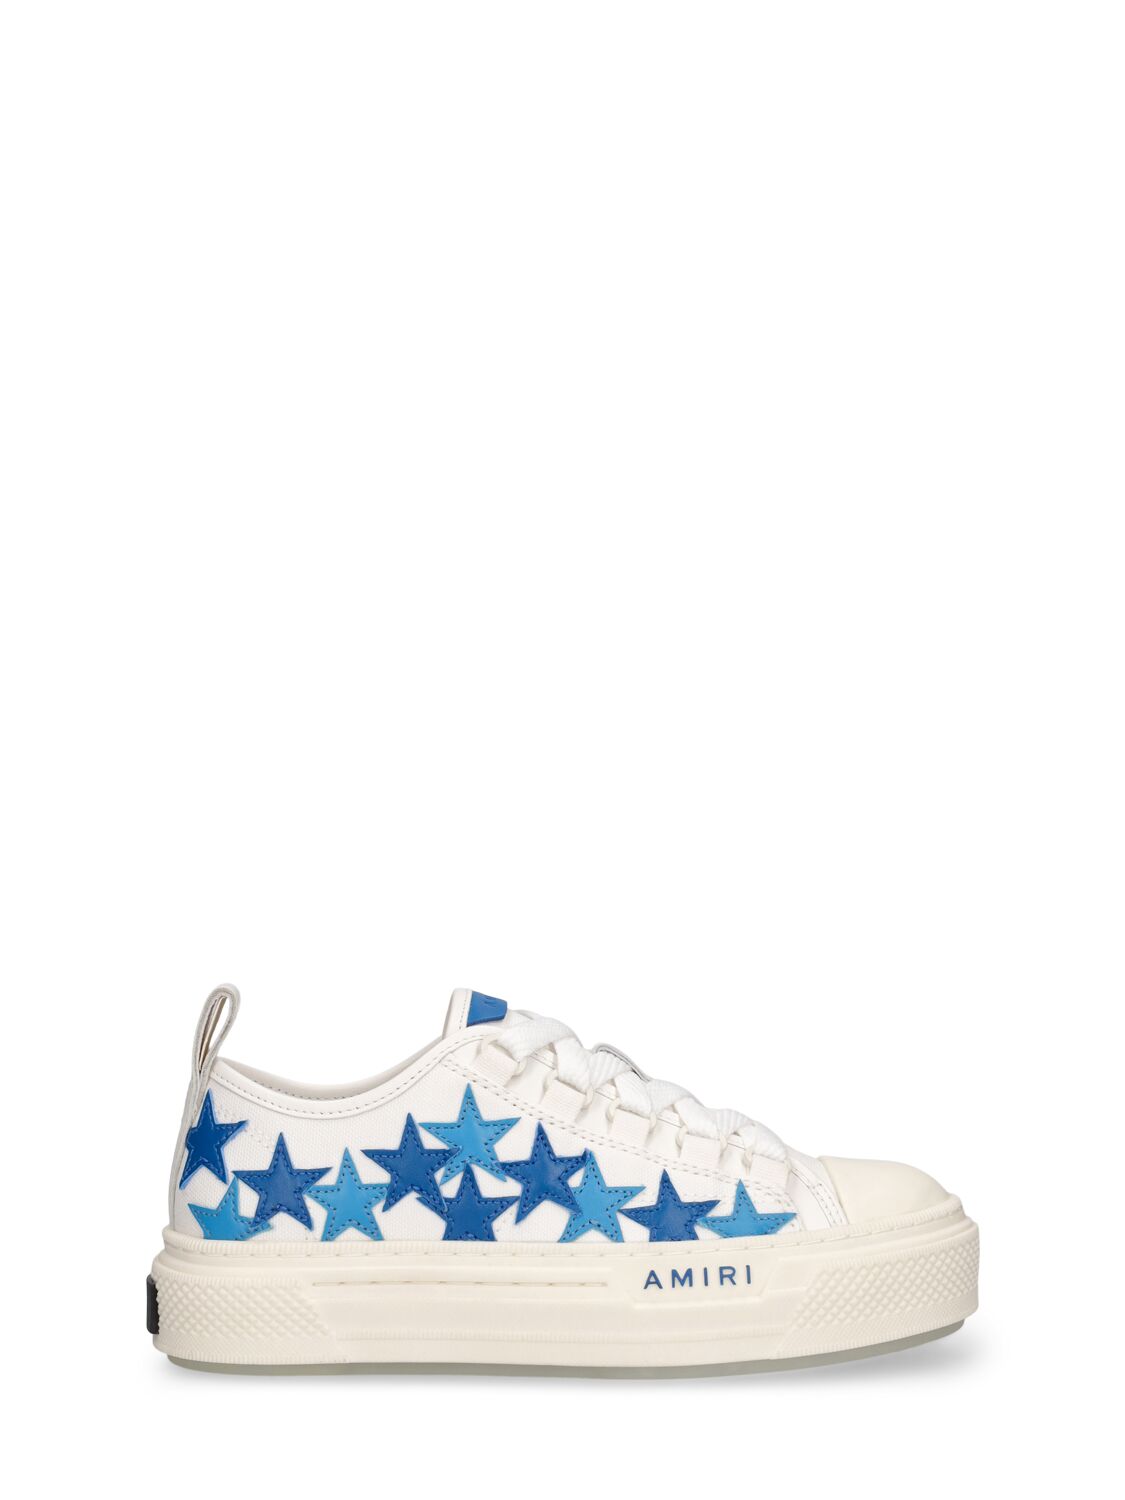 AMIRI PRINTED COTTON CANVAS LACE-UP SNEAKERS